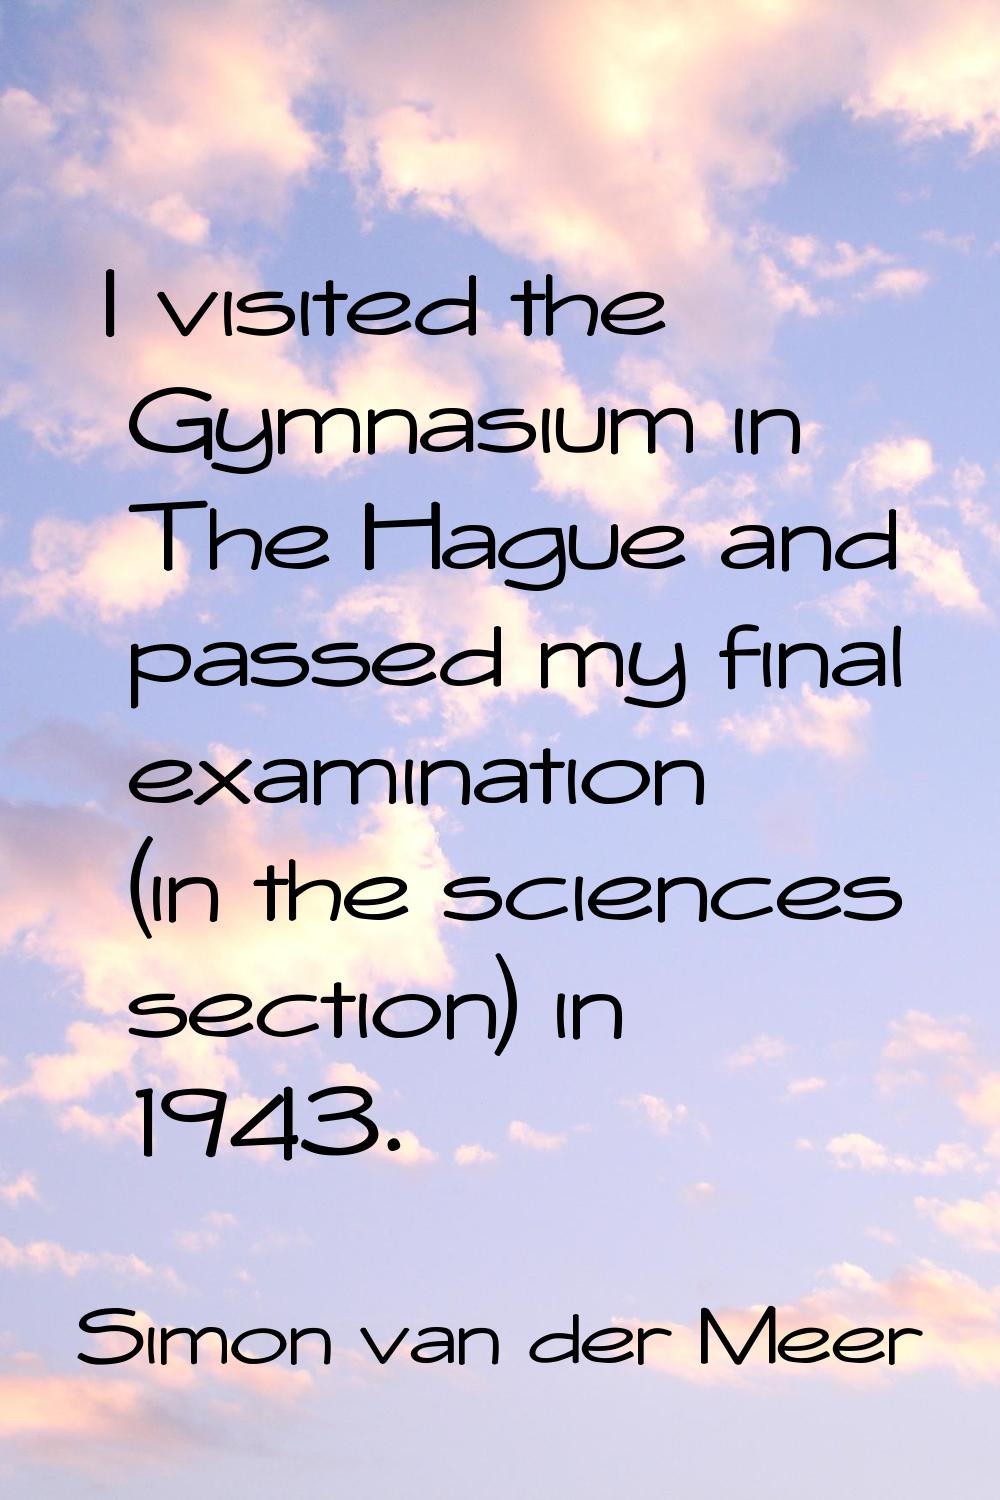 I visited the Gymnasium in The Hague and passed my final examination (in the sciences section) in 1